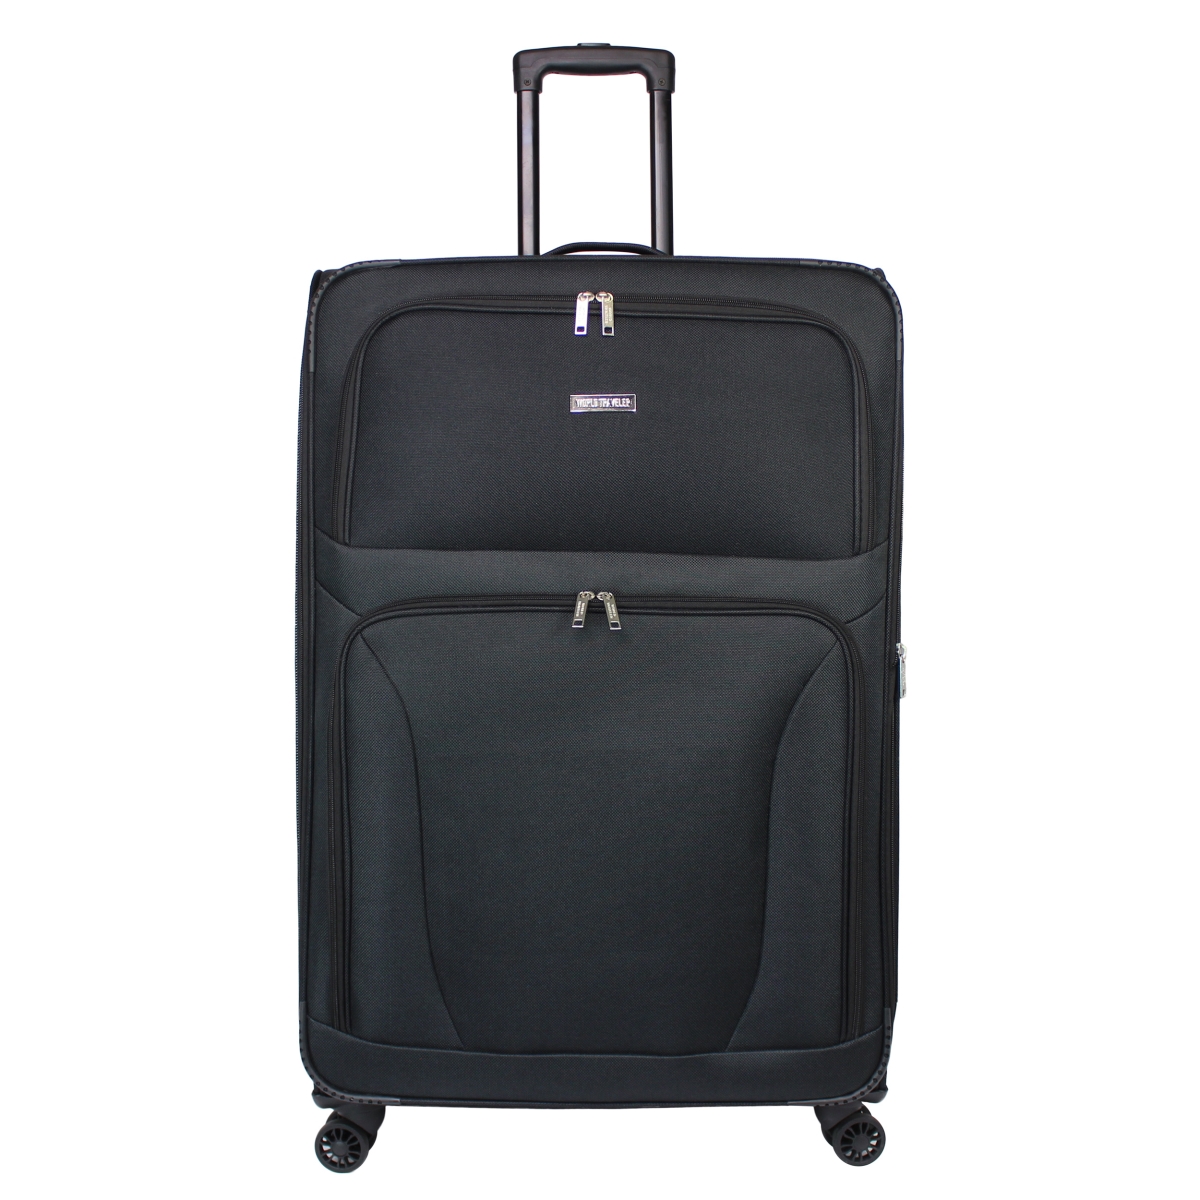 Wt100-30-black 30 In. Embarque Collection Super Lightweight Spinner Upright Suitcase - Black